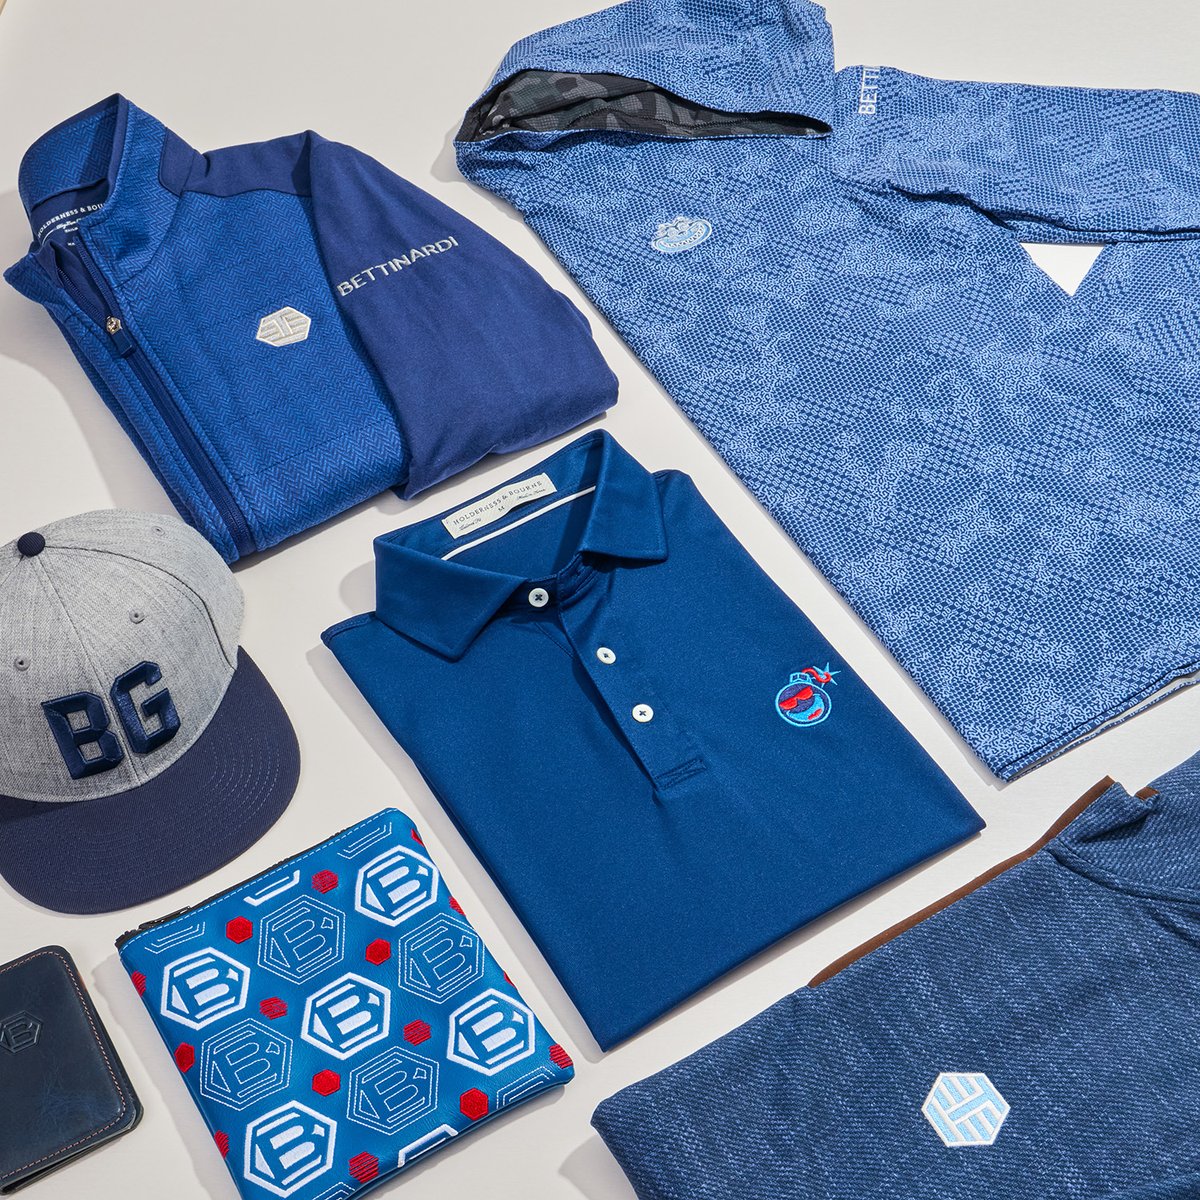 Gear up for the perfect round! Shop our latest golf apparel and accessories online now at bettinardi.com.

#bettinardi #golf #golfislife #golfwear